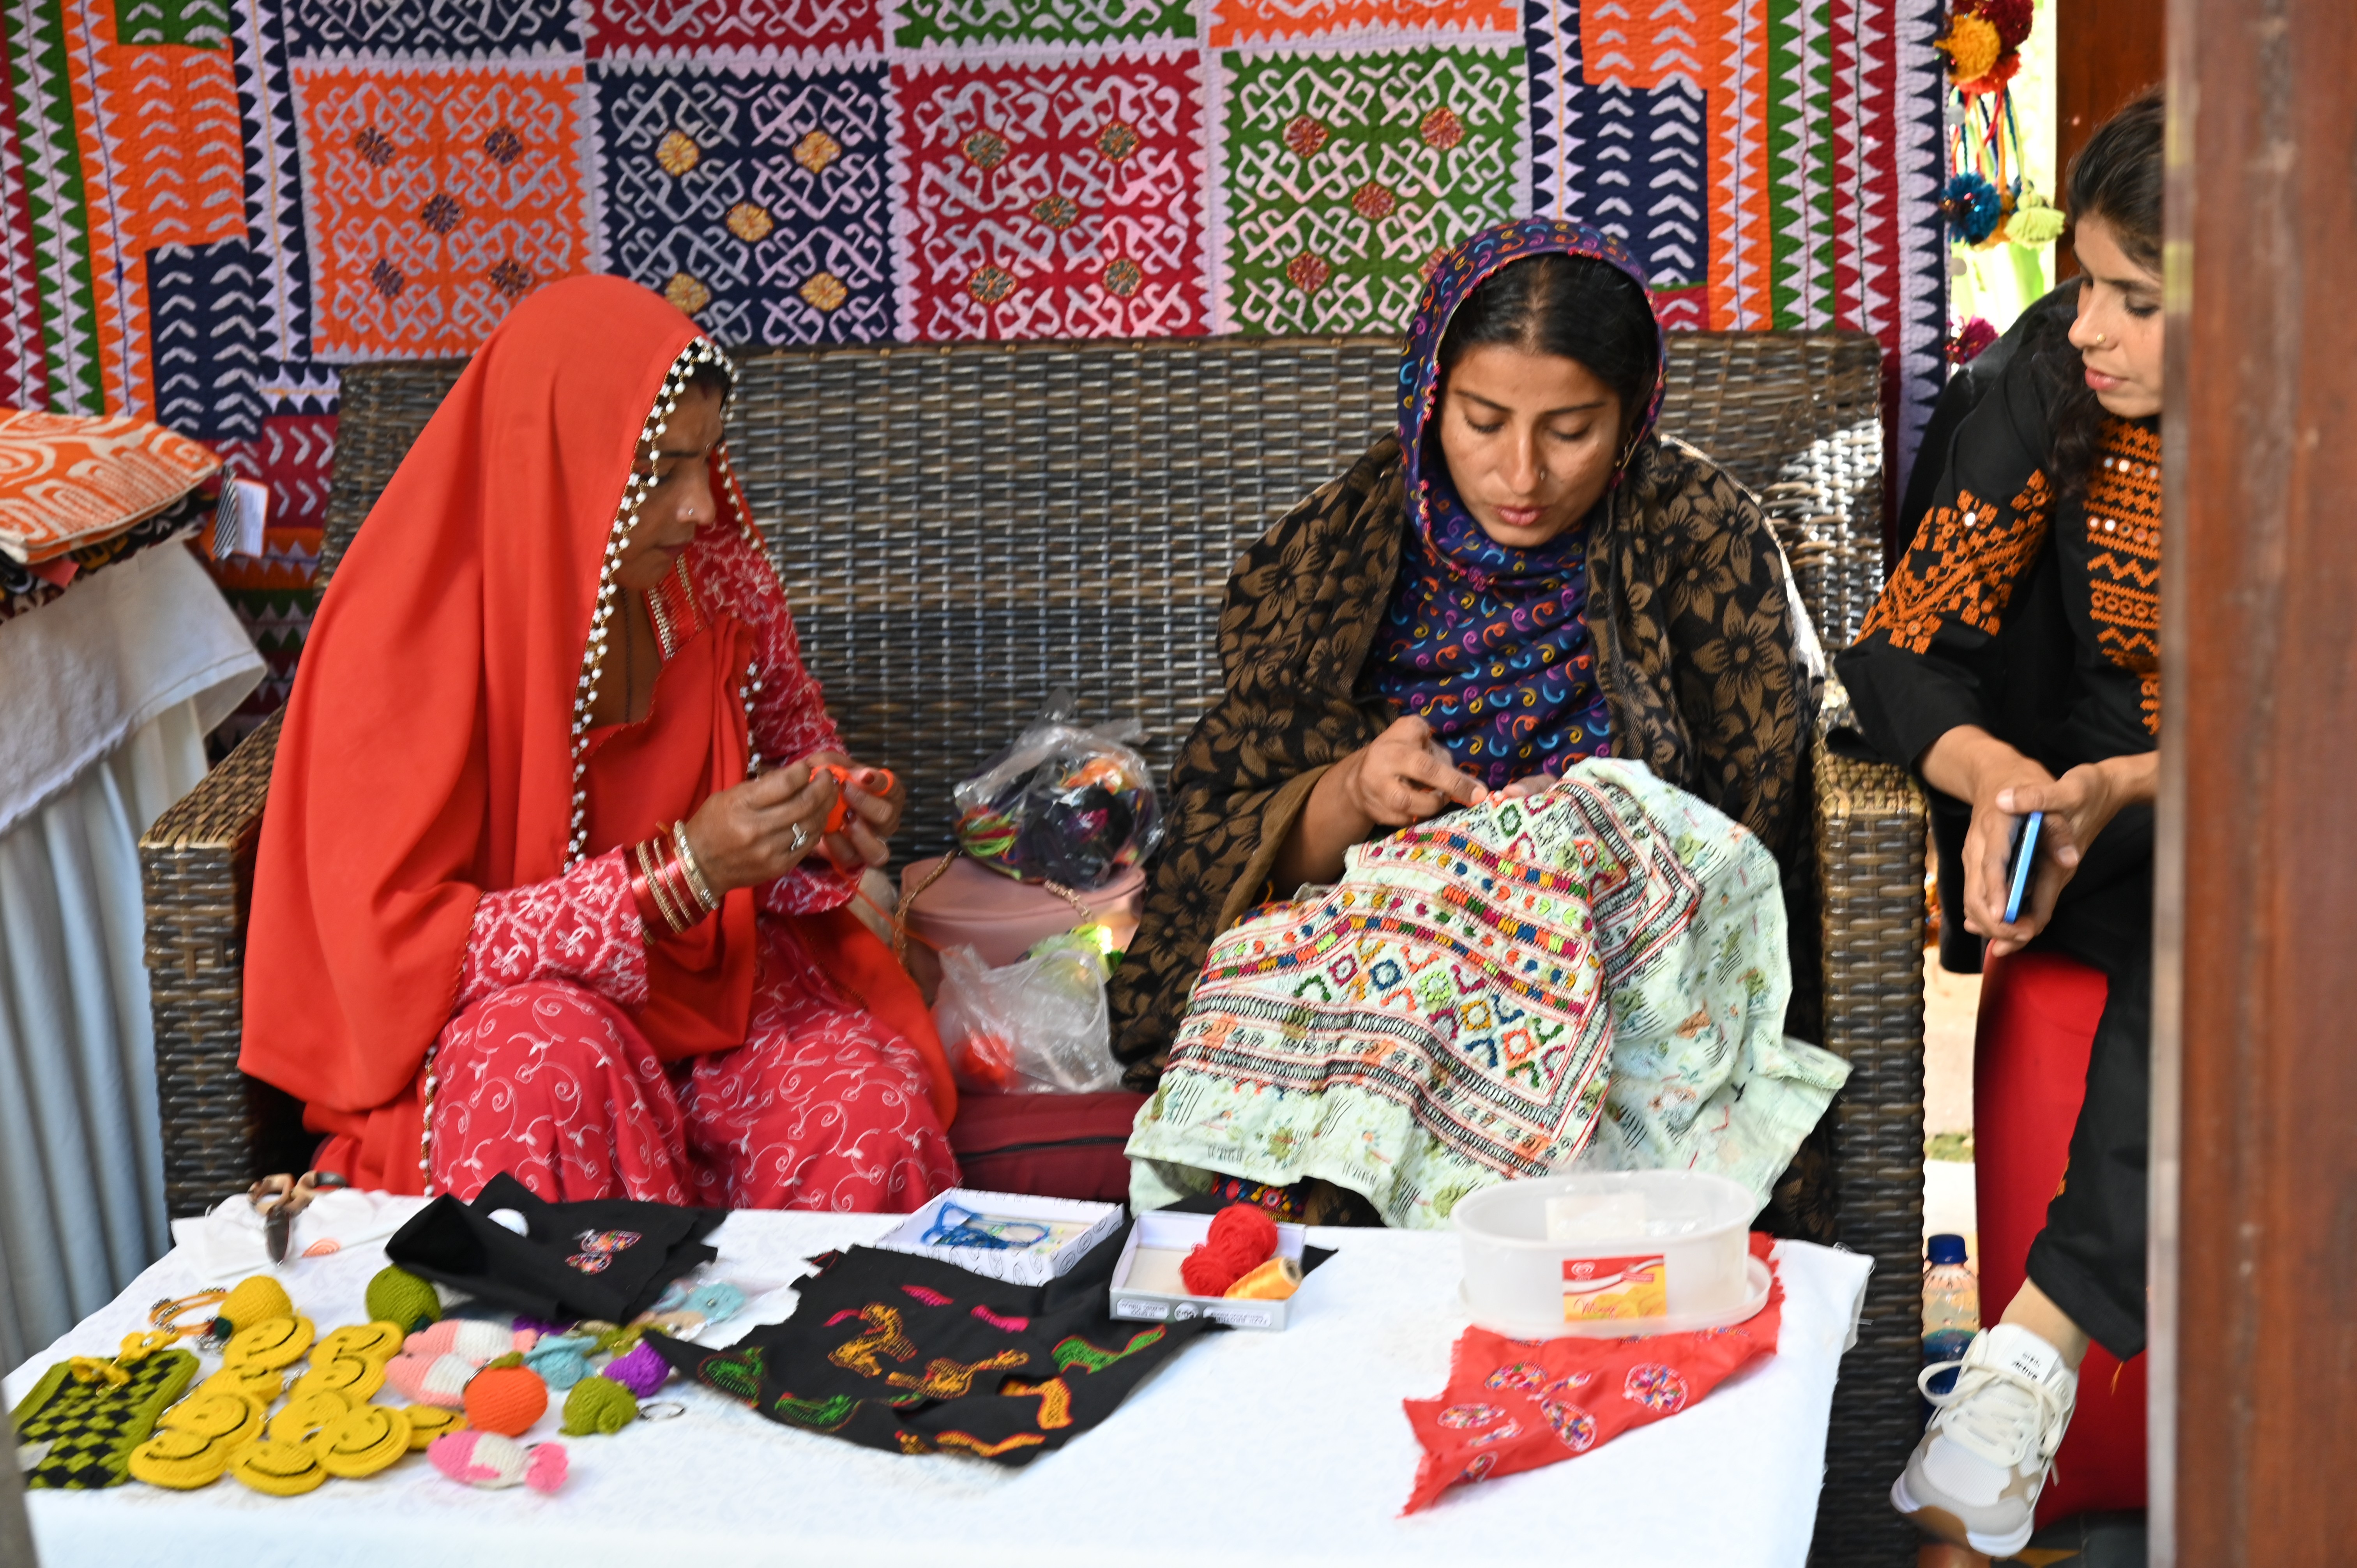 The young girls busy with embroidery work